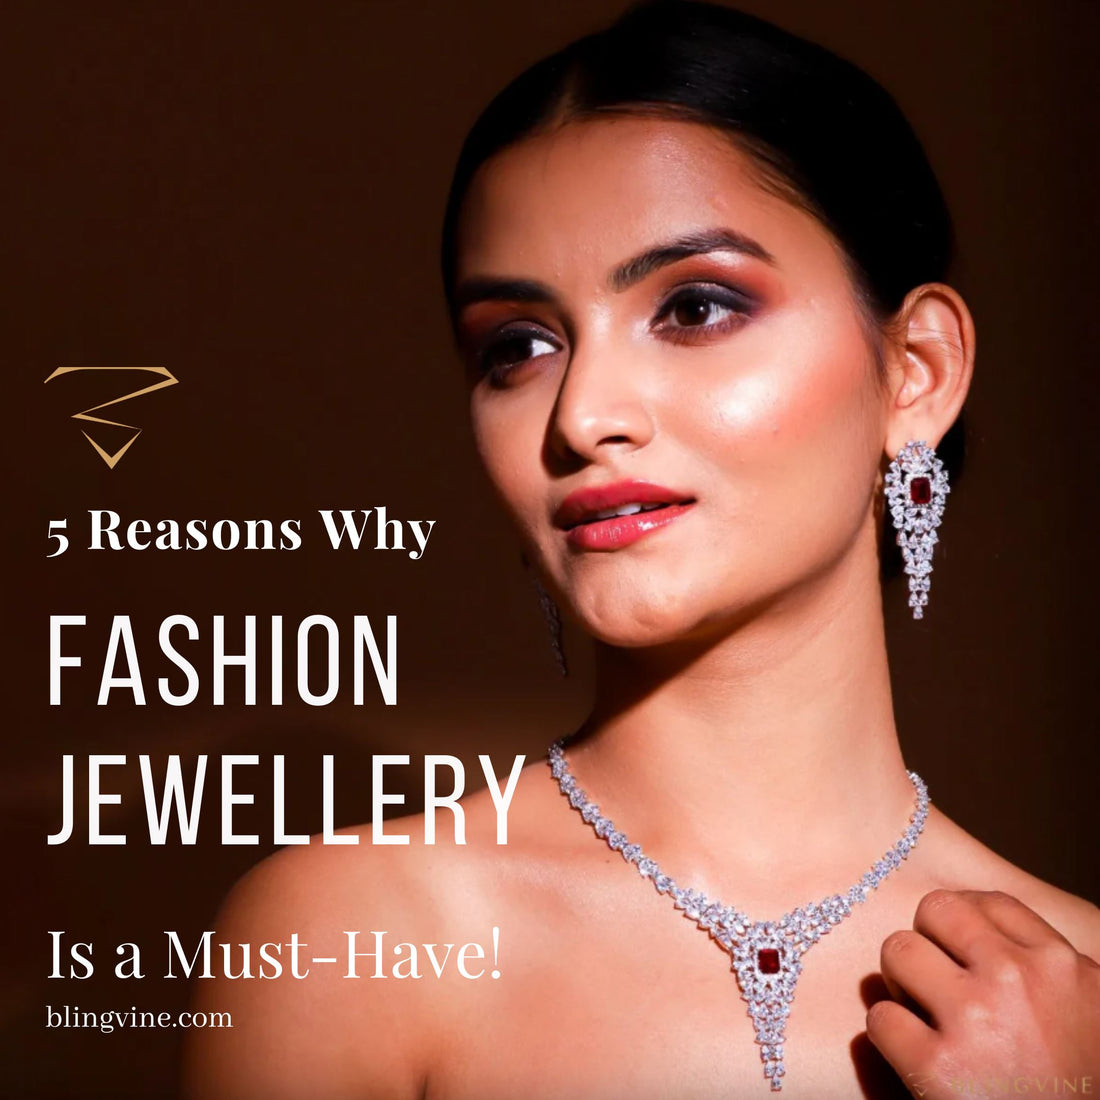 5 Reasons Why Fashion Jewellery is a must-have!